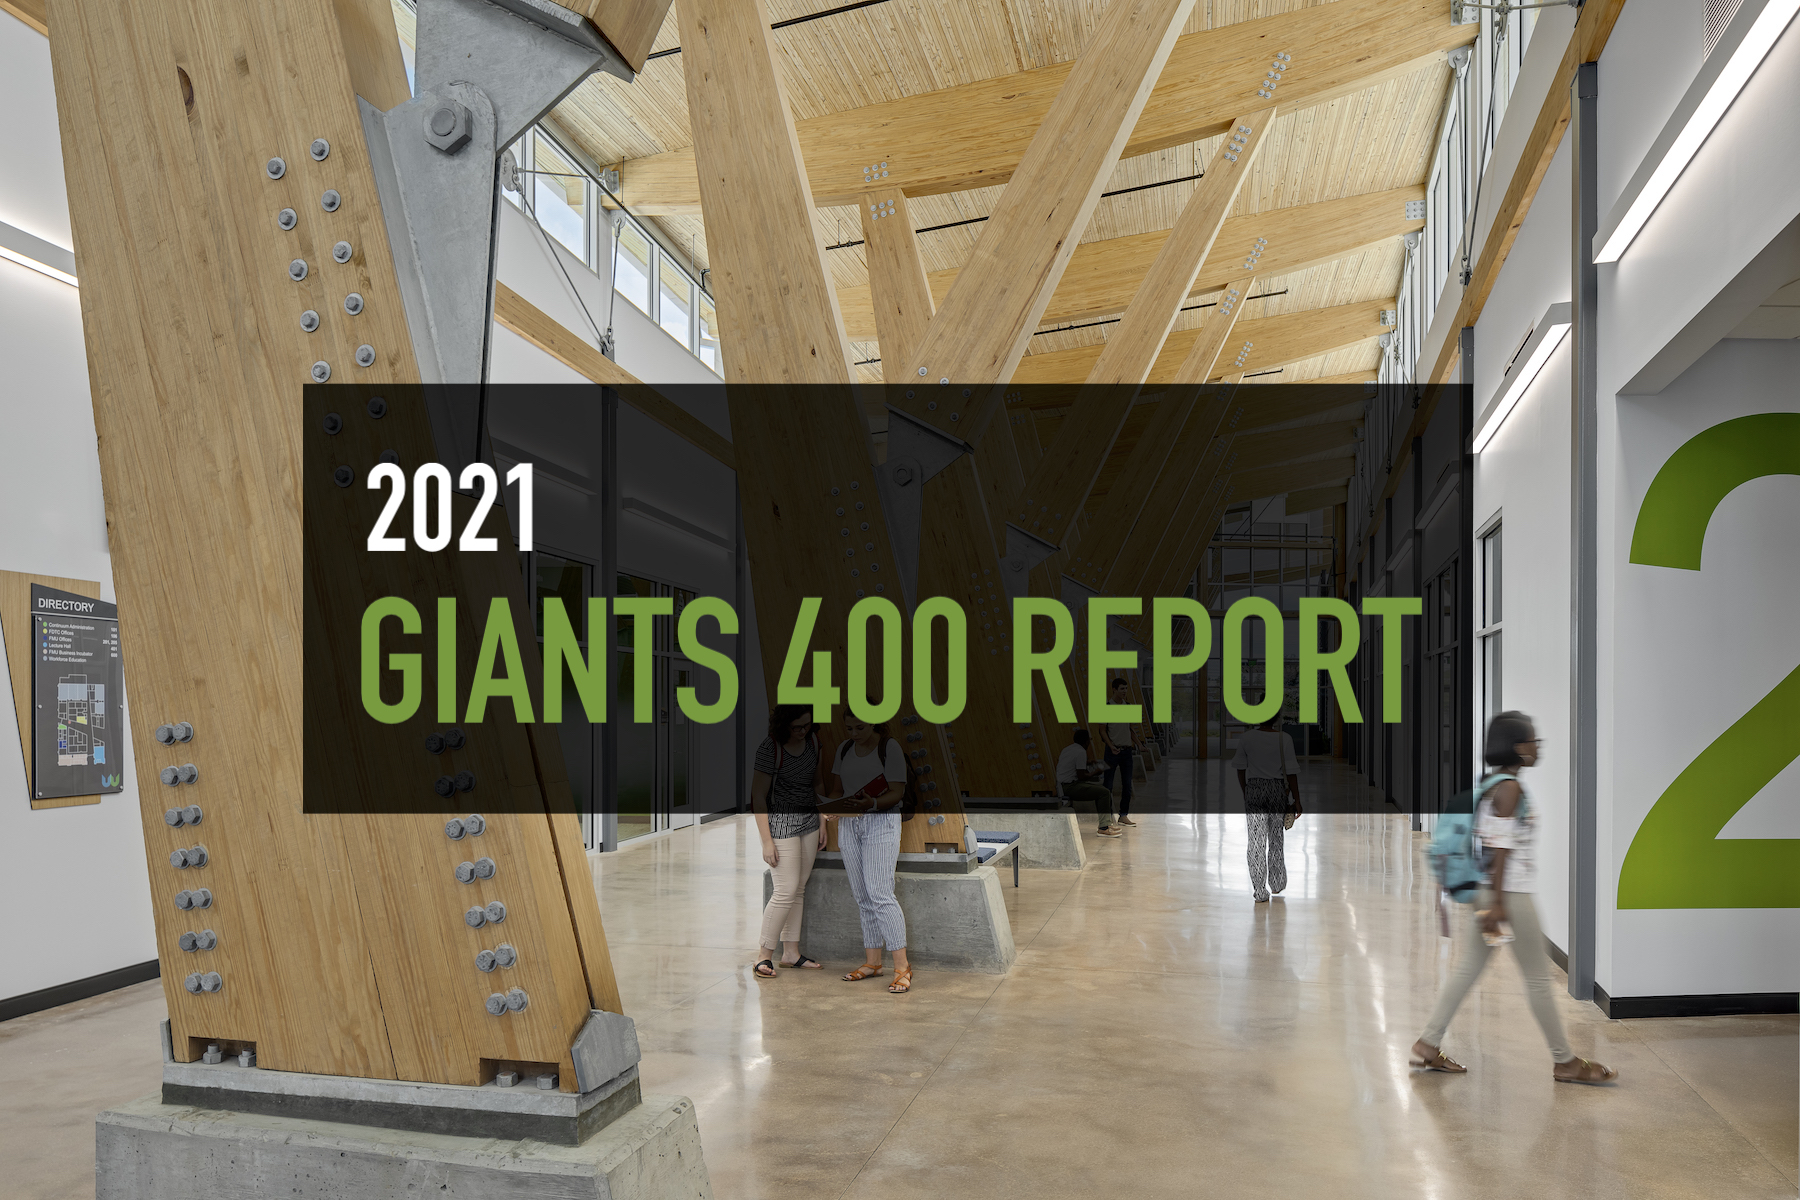 2021 Giants 400 Report The Continuum technical education facility, Lake City, S.C., Kris Decker, Firewater Photography, courtesy McMillan Pazdan Smith